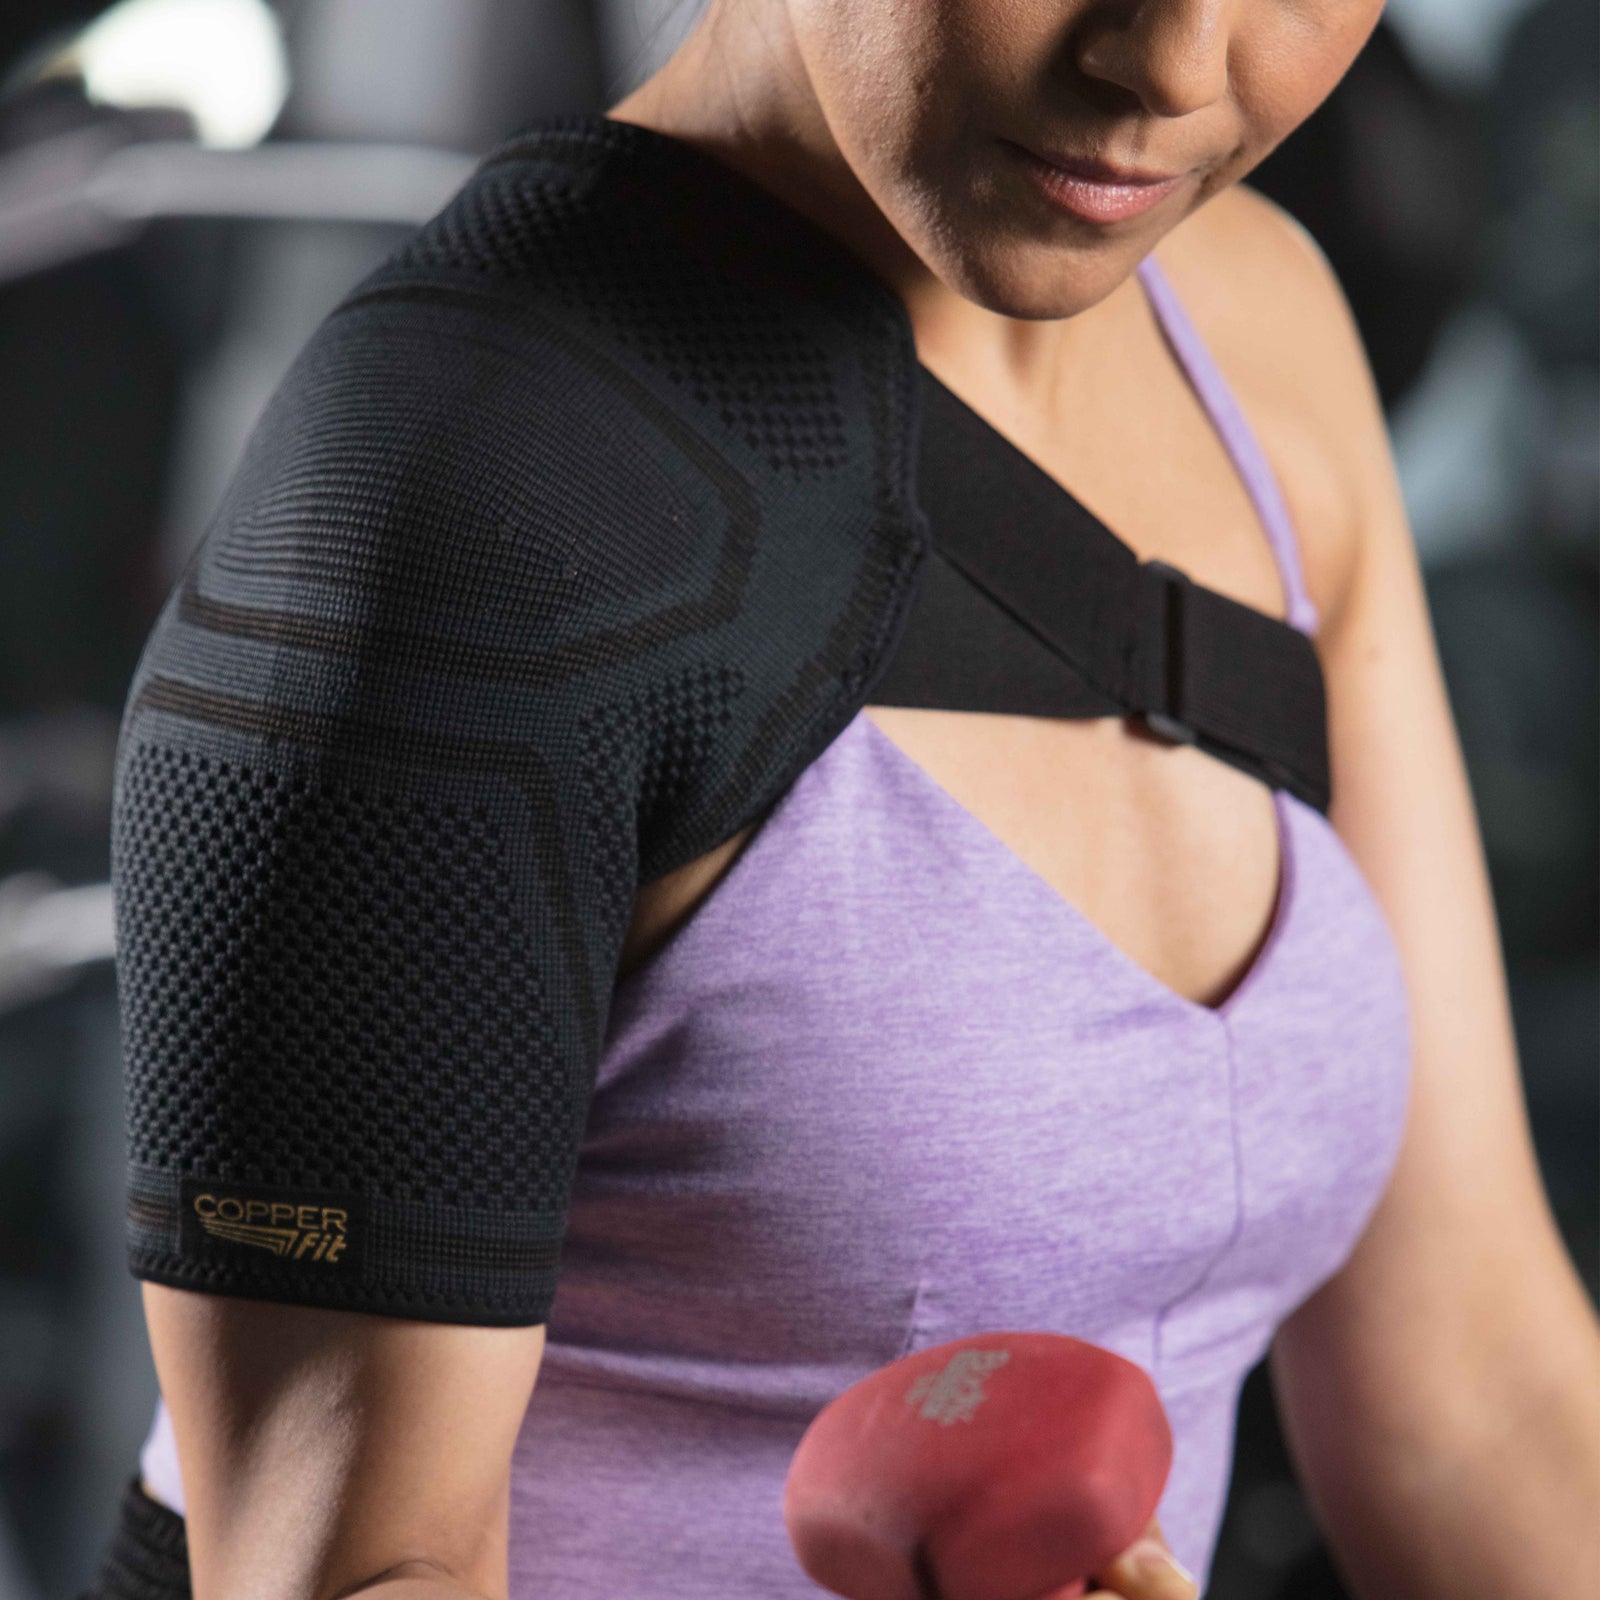 Other Health & Beauty - Copper Fit Rapid Relief Back Support Brace With  Hot/Cold Therapy was sold for R219.00 on 4 Dec at 10:02 by Snatcher Online  in Johannesburg (ID:416766830)